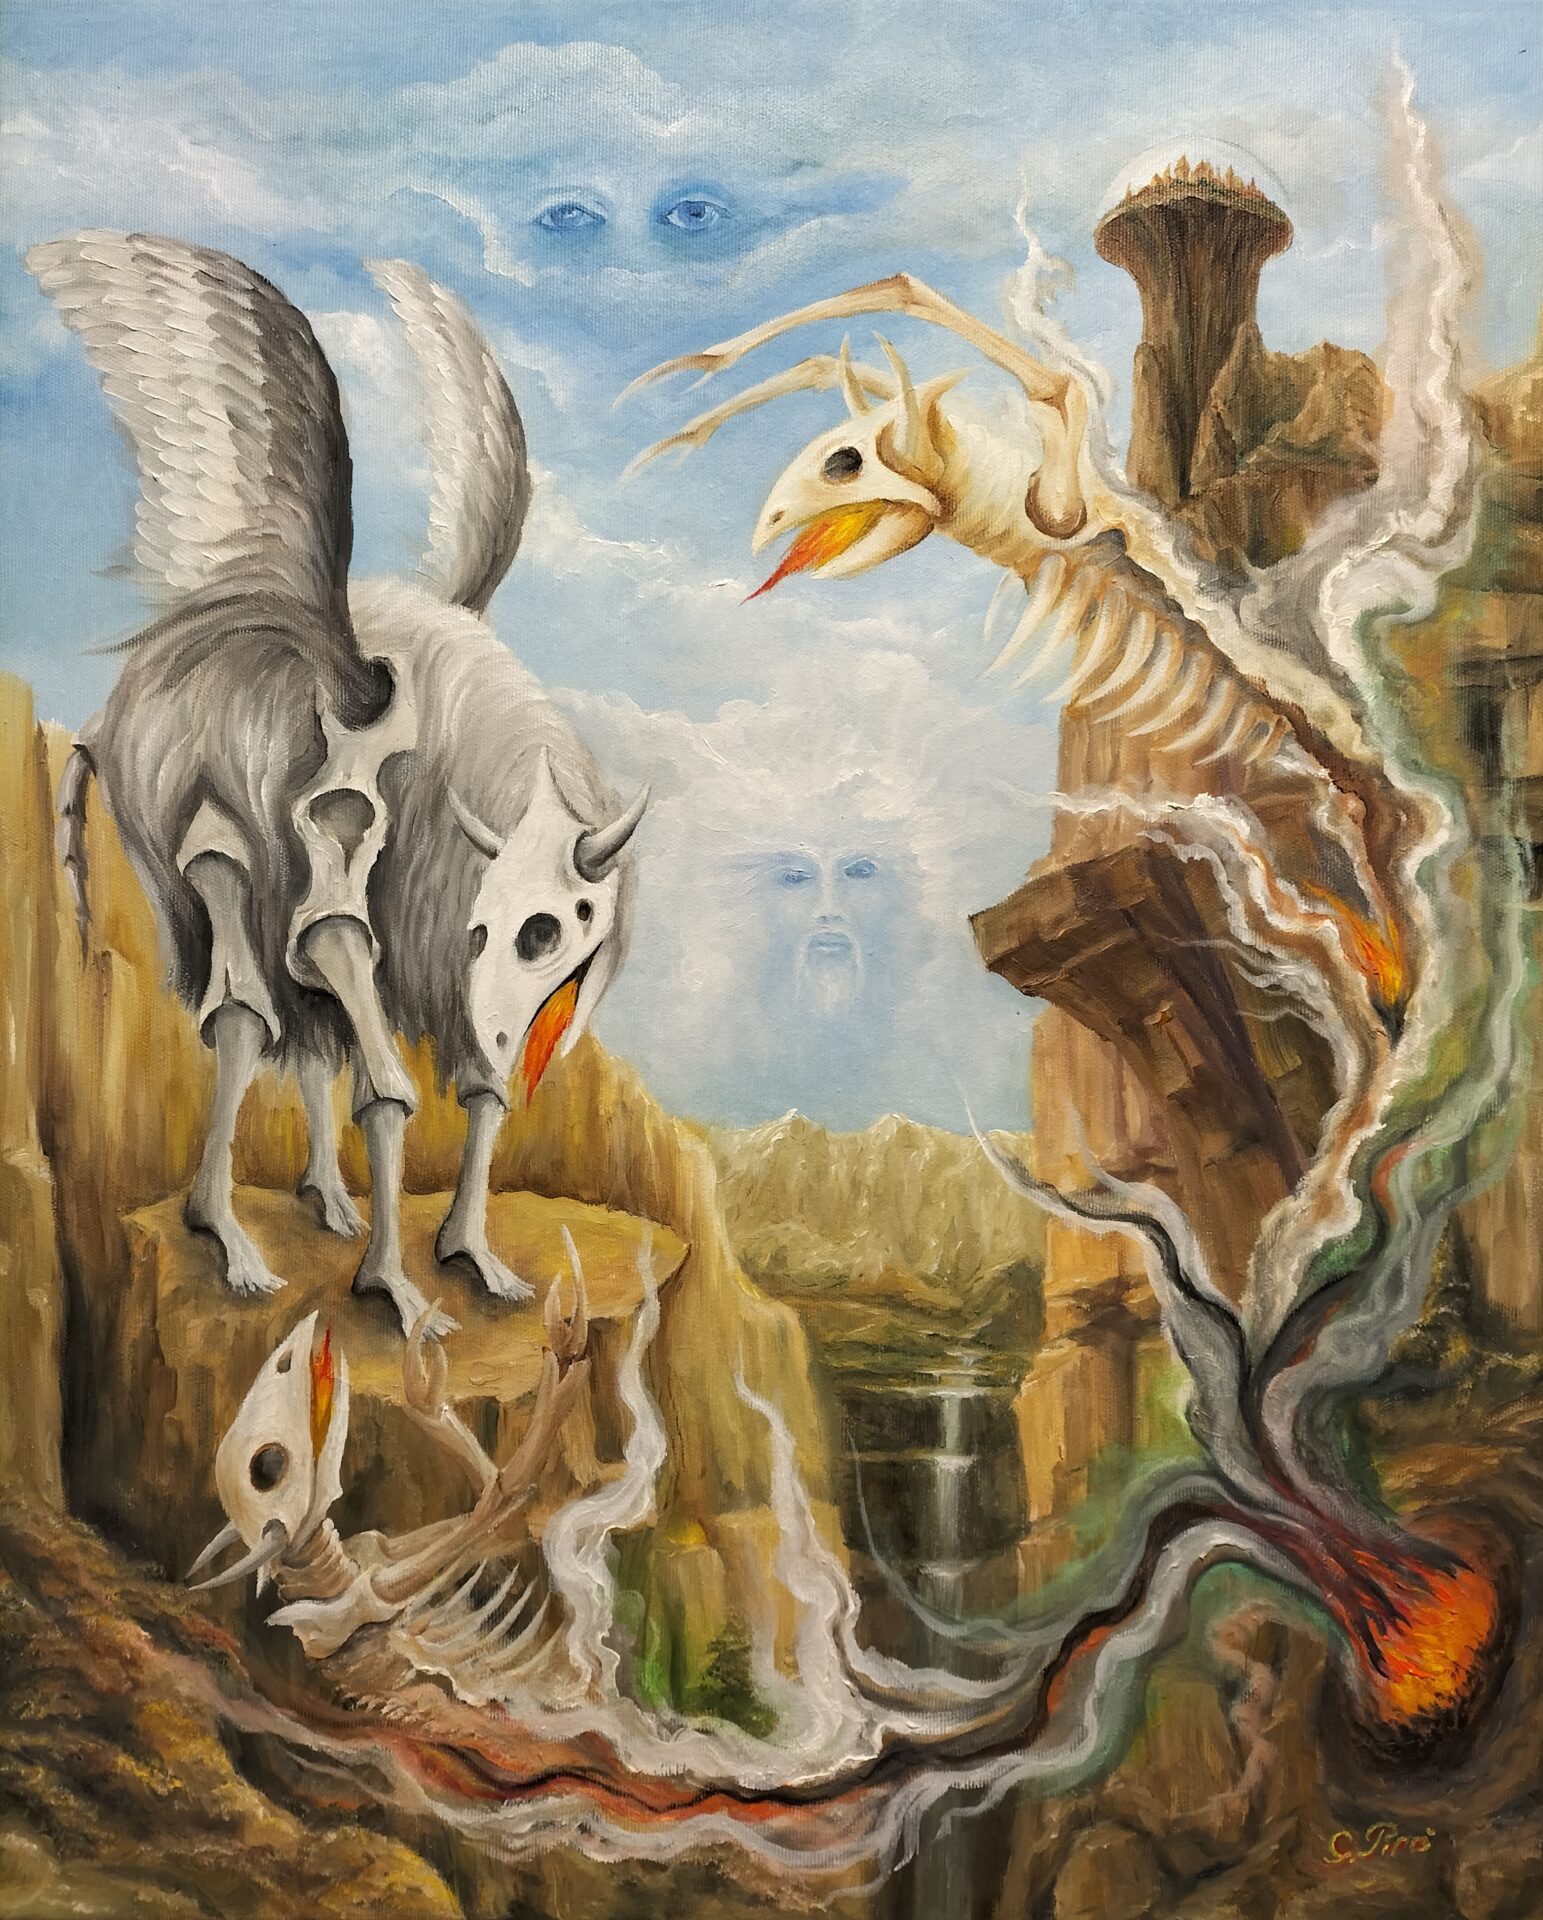 surrealistic, oil painting, gregory pyra piro, ravine, waterfall, mountains, demons, volcanic lava, pyroduct, ethereal figures, winged creature, goat, biodome, butte, buildings